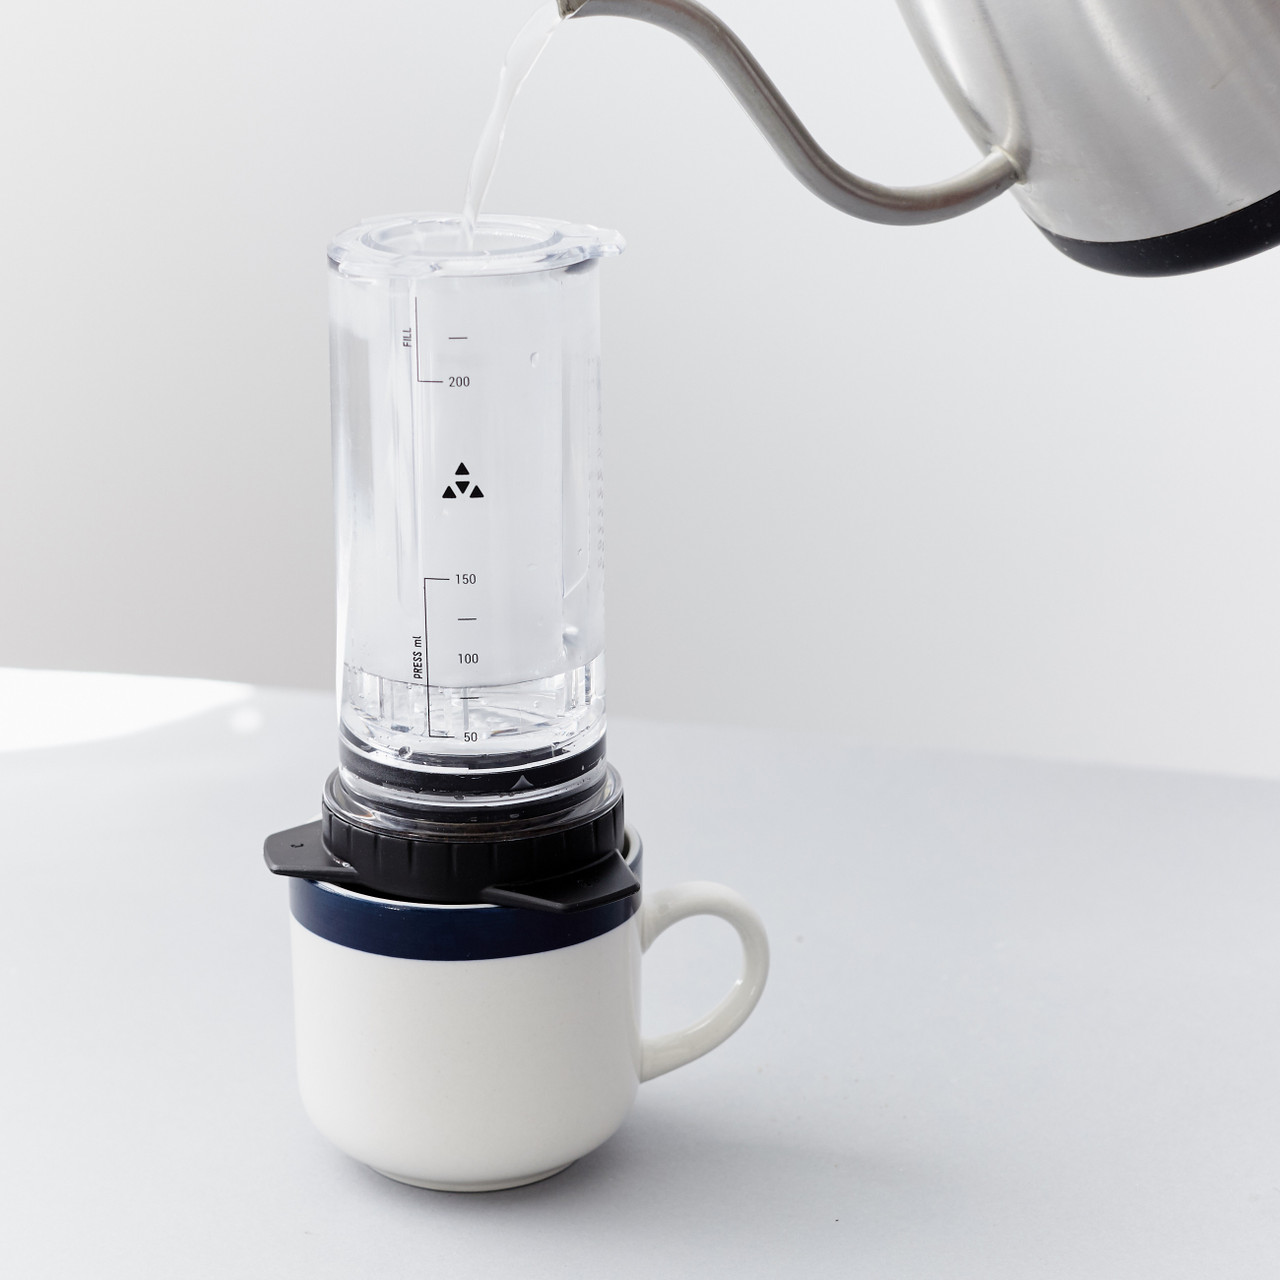 Acaia Pearl Scale Review: A $150 Coffee Scale You Don't Really Need